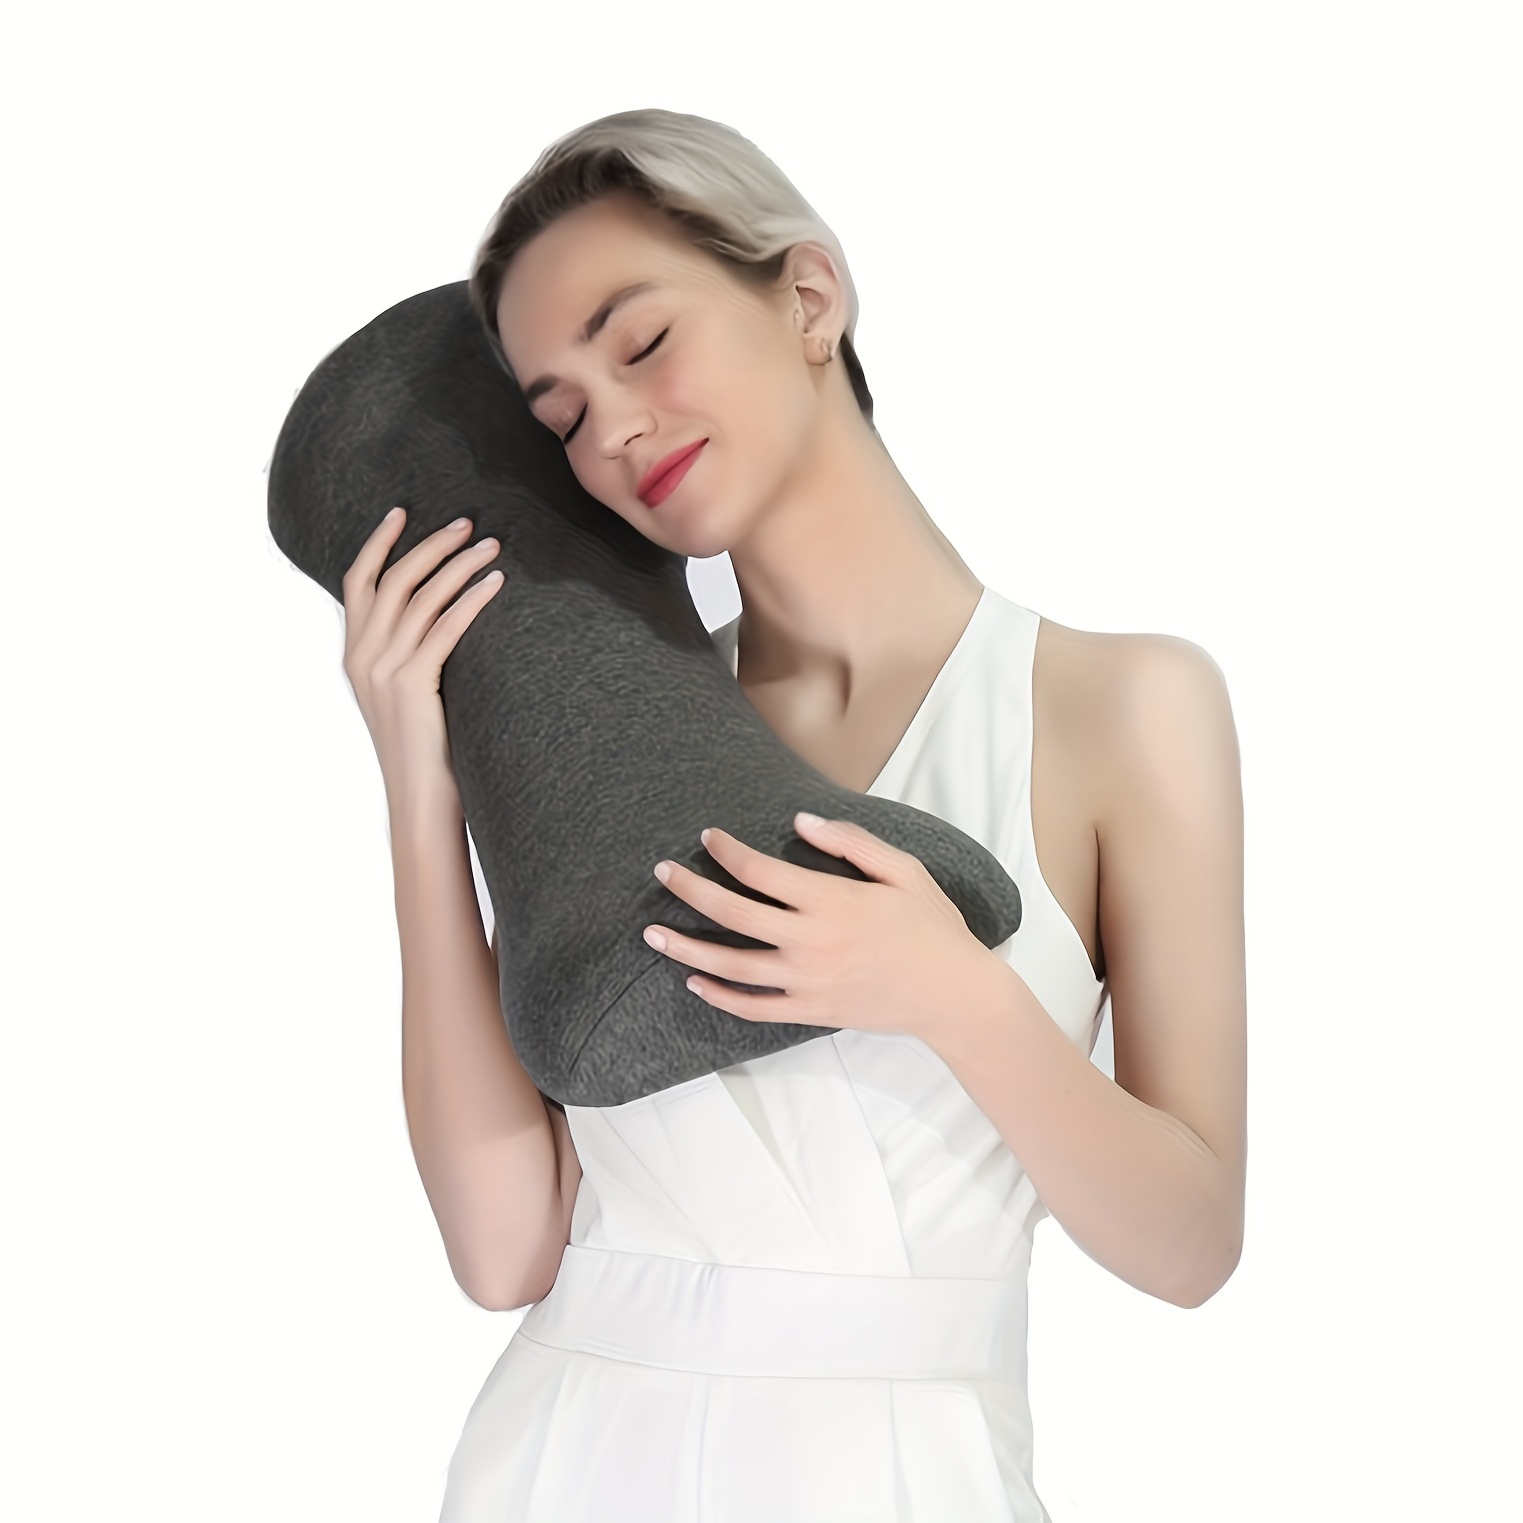 Lumbar Pillow for Sleeping, Support Pillow Waist Sciatic Pain Relief Cushion  for Bed Rest - Side, Back and Stomach Sleepers 